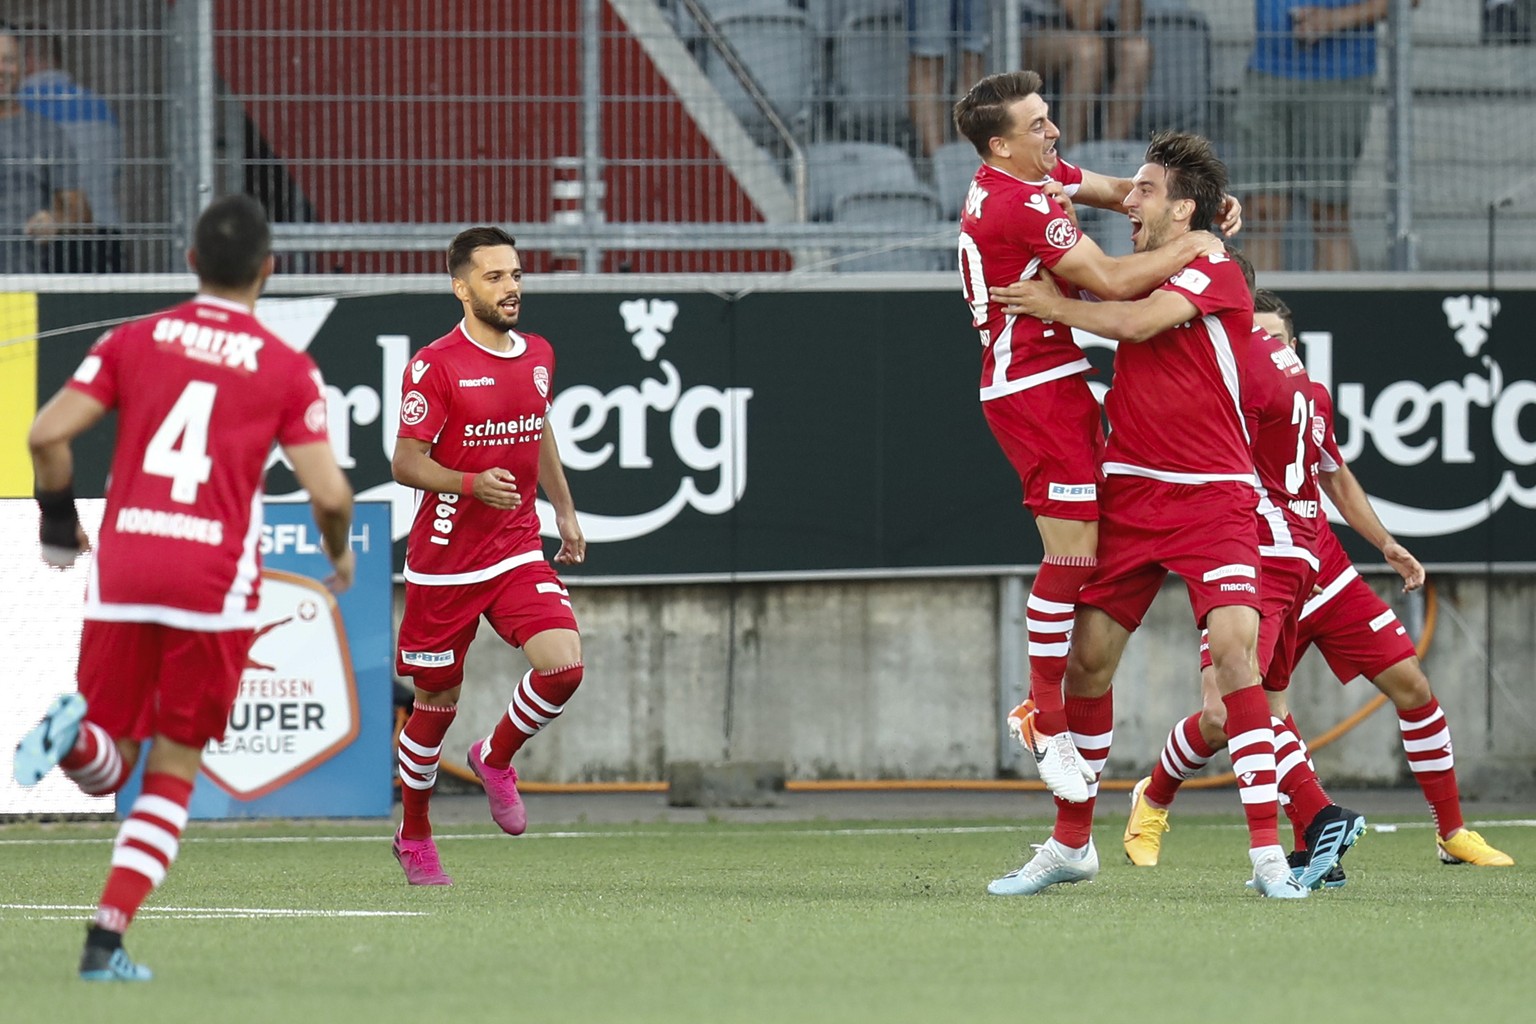 Thun&#039;s Simone Rapp, right, celebrates with his teammates after scoring the 2-2 during the Europa League Qualification round 3 match between FC Thun and Spartak Moscow at the Stockhorn Arena in Th ...